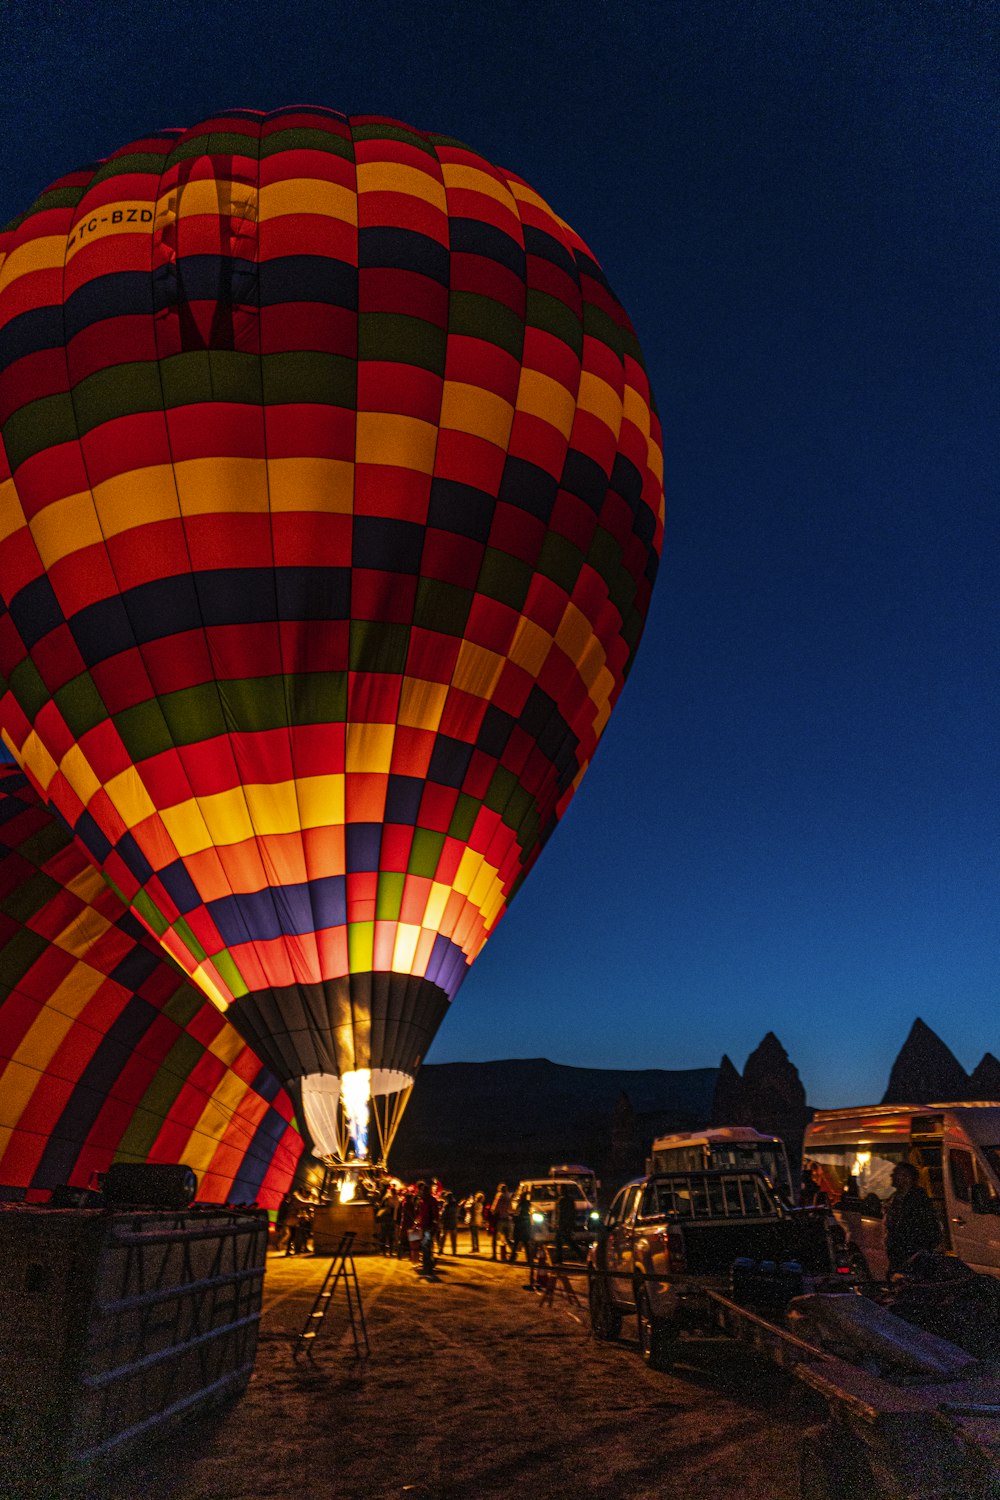 red yellow and blue hot air balloon